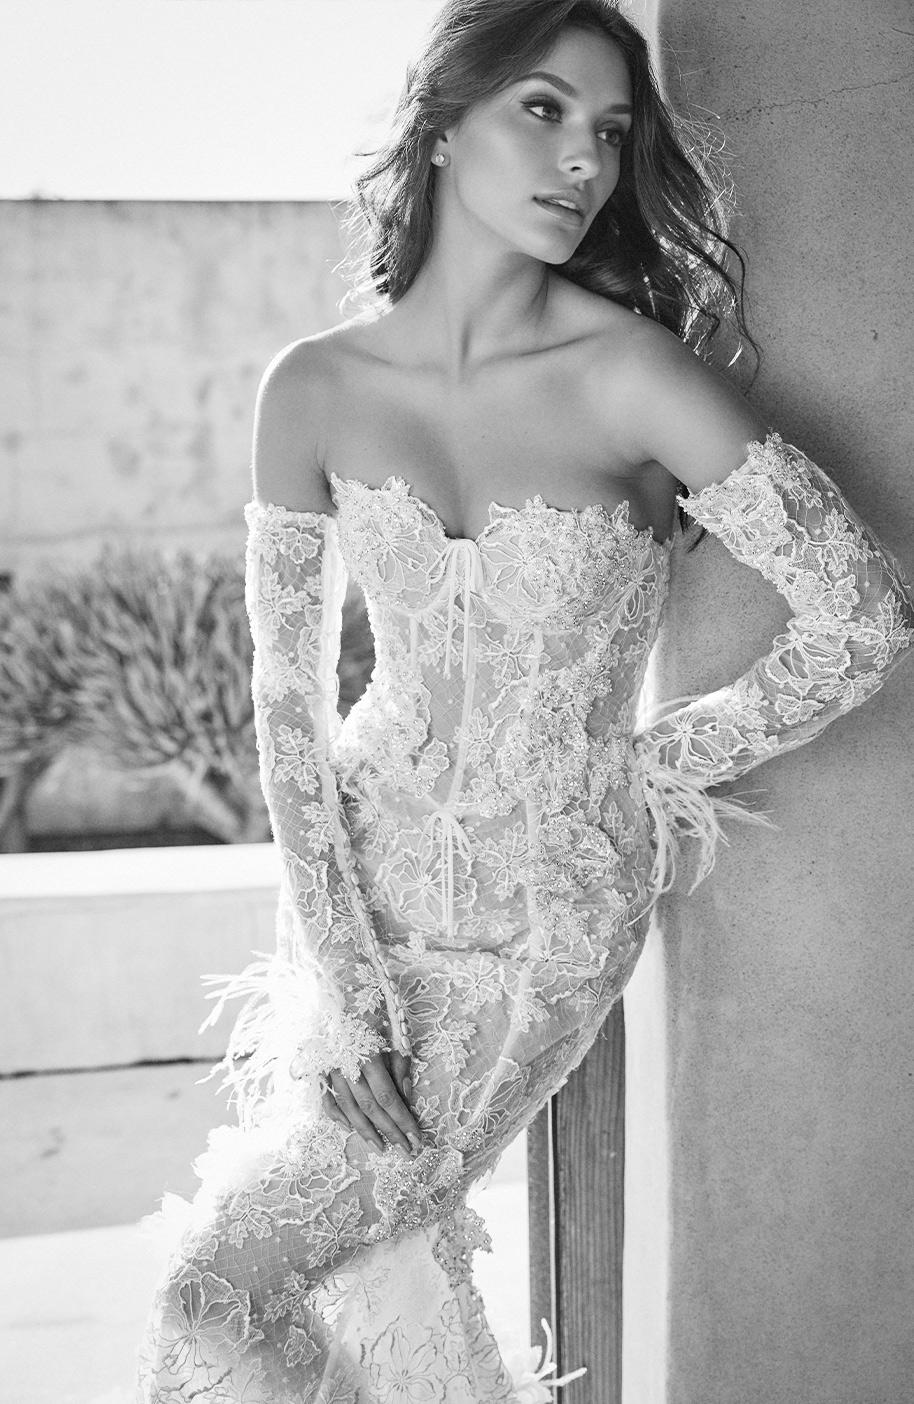 Model wearing a white gown - black and white image